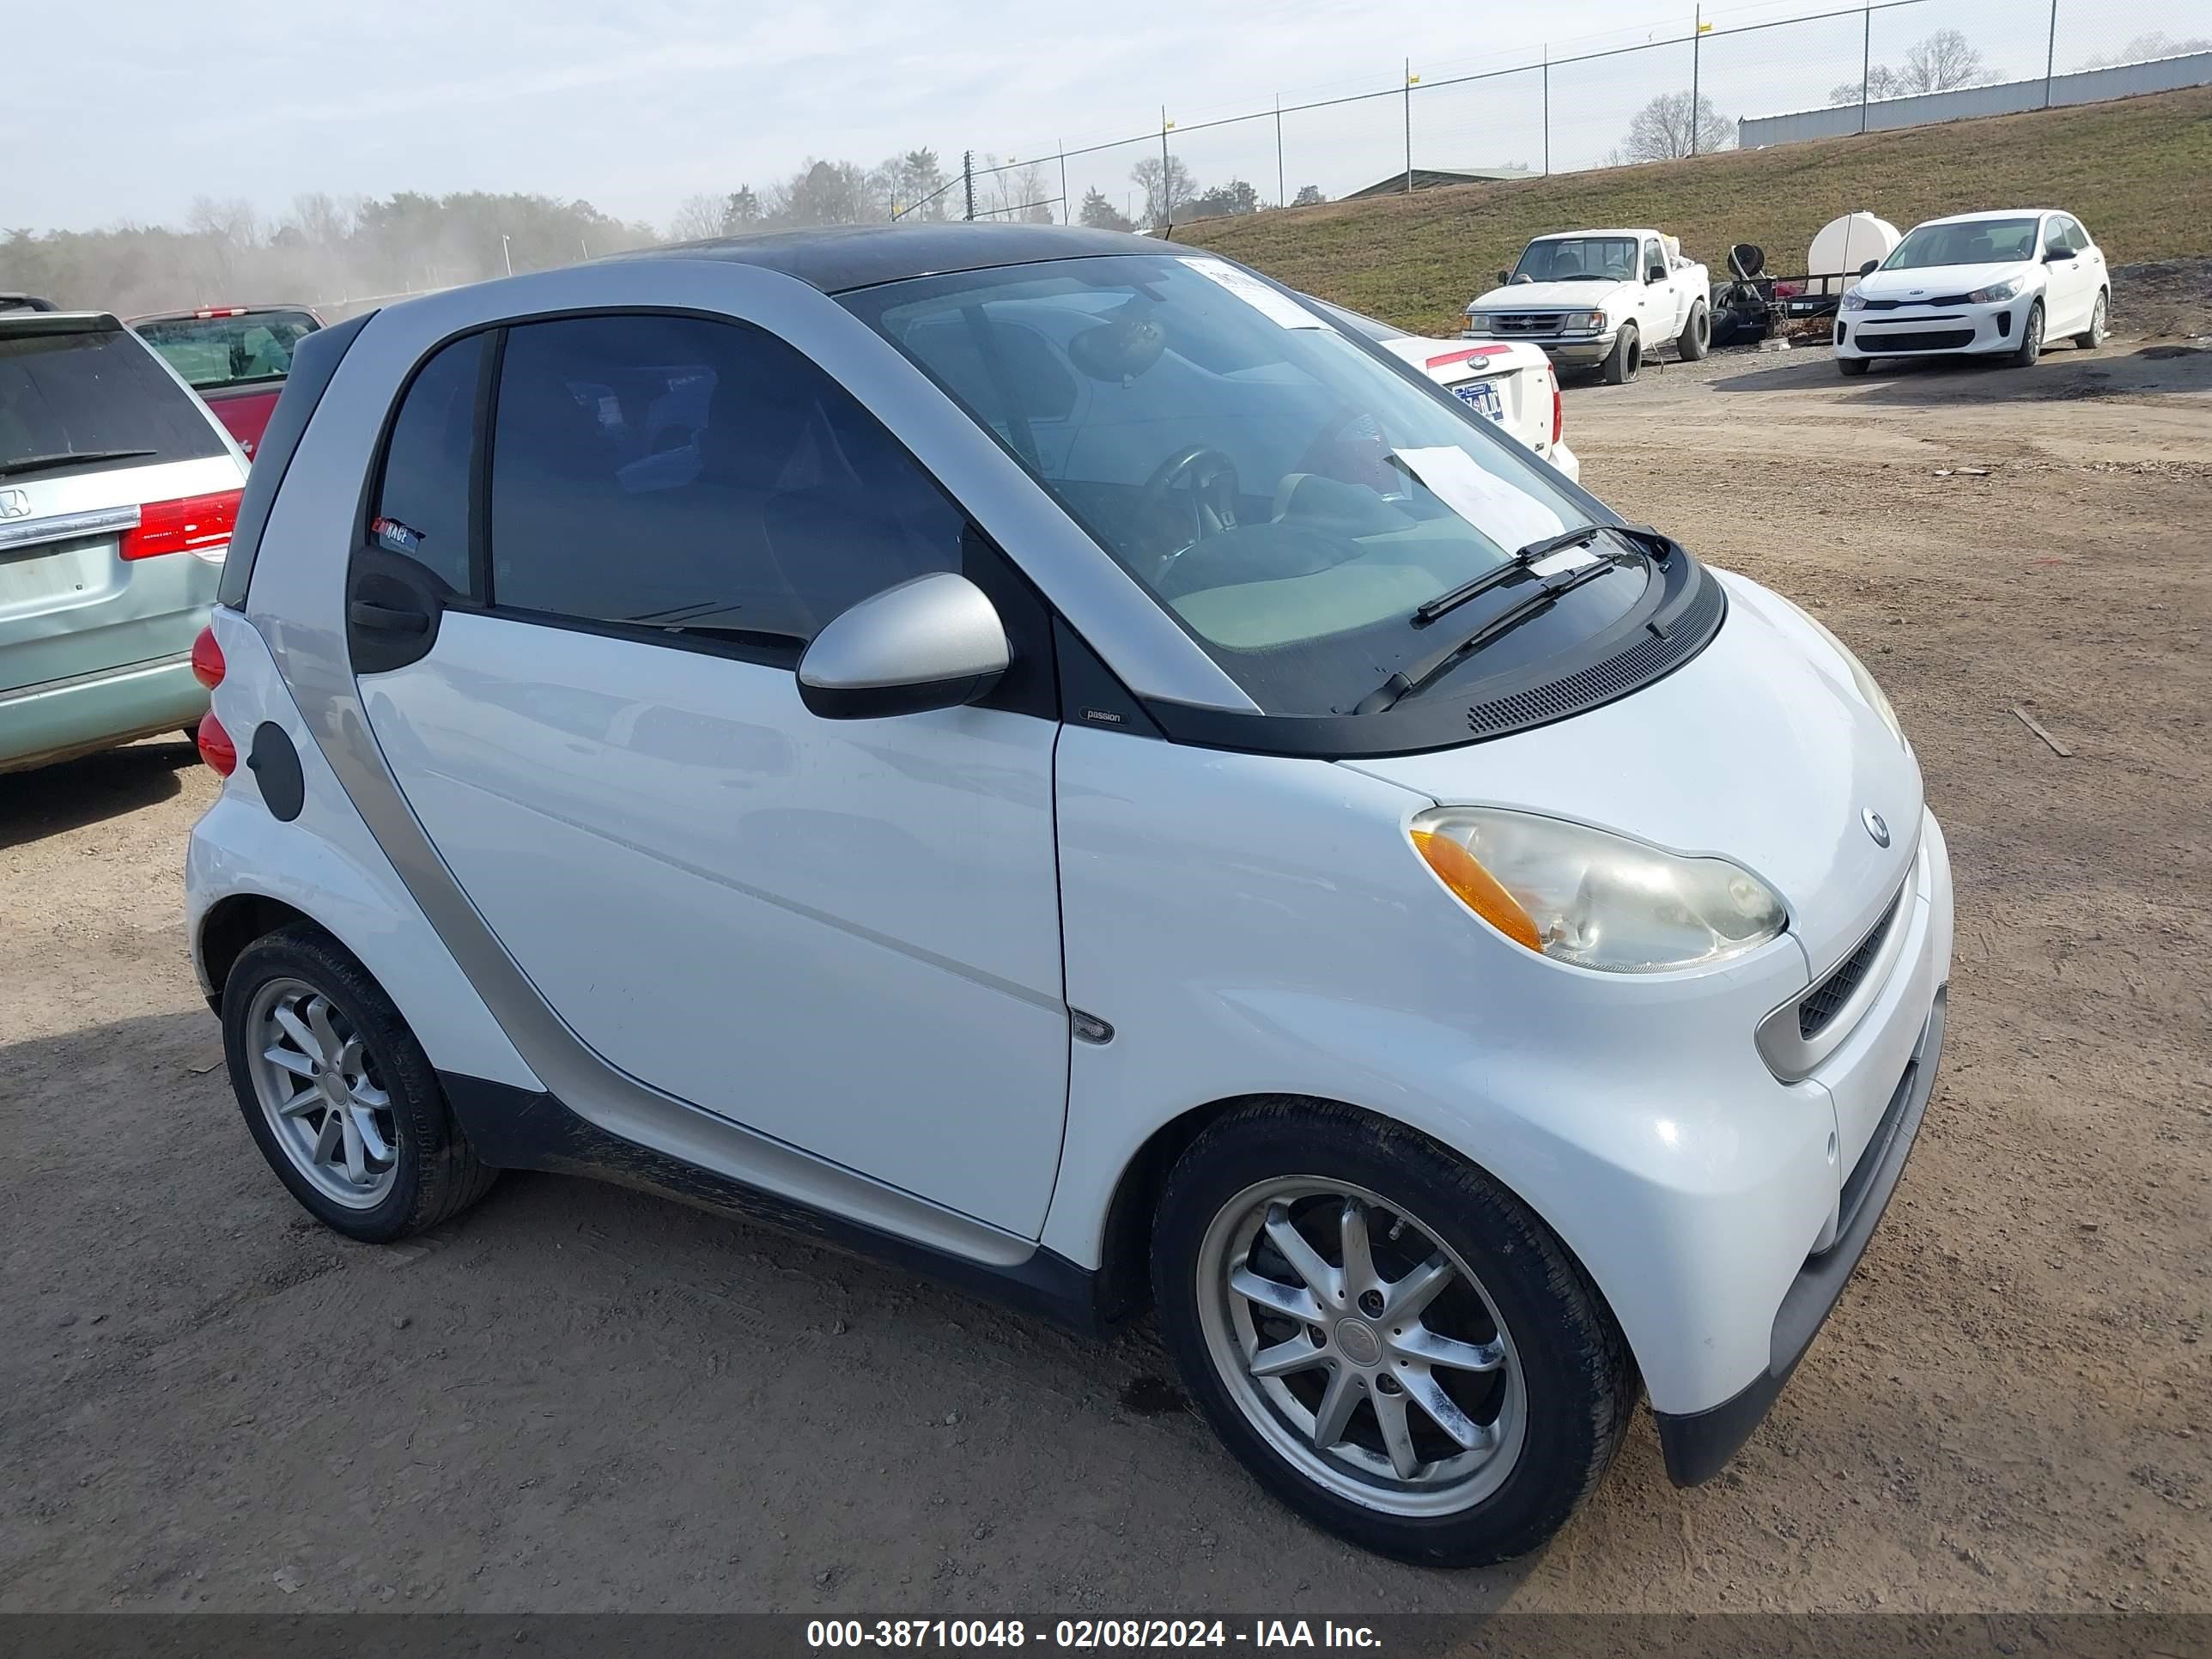 vin: WMEEJ31X79K263587 WMEEJ31X79K263587 2009 smart fortwo 1000 for Sale in 37914, 3634 E. Governor John Sevier Hwy, Knoxville, USA